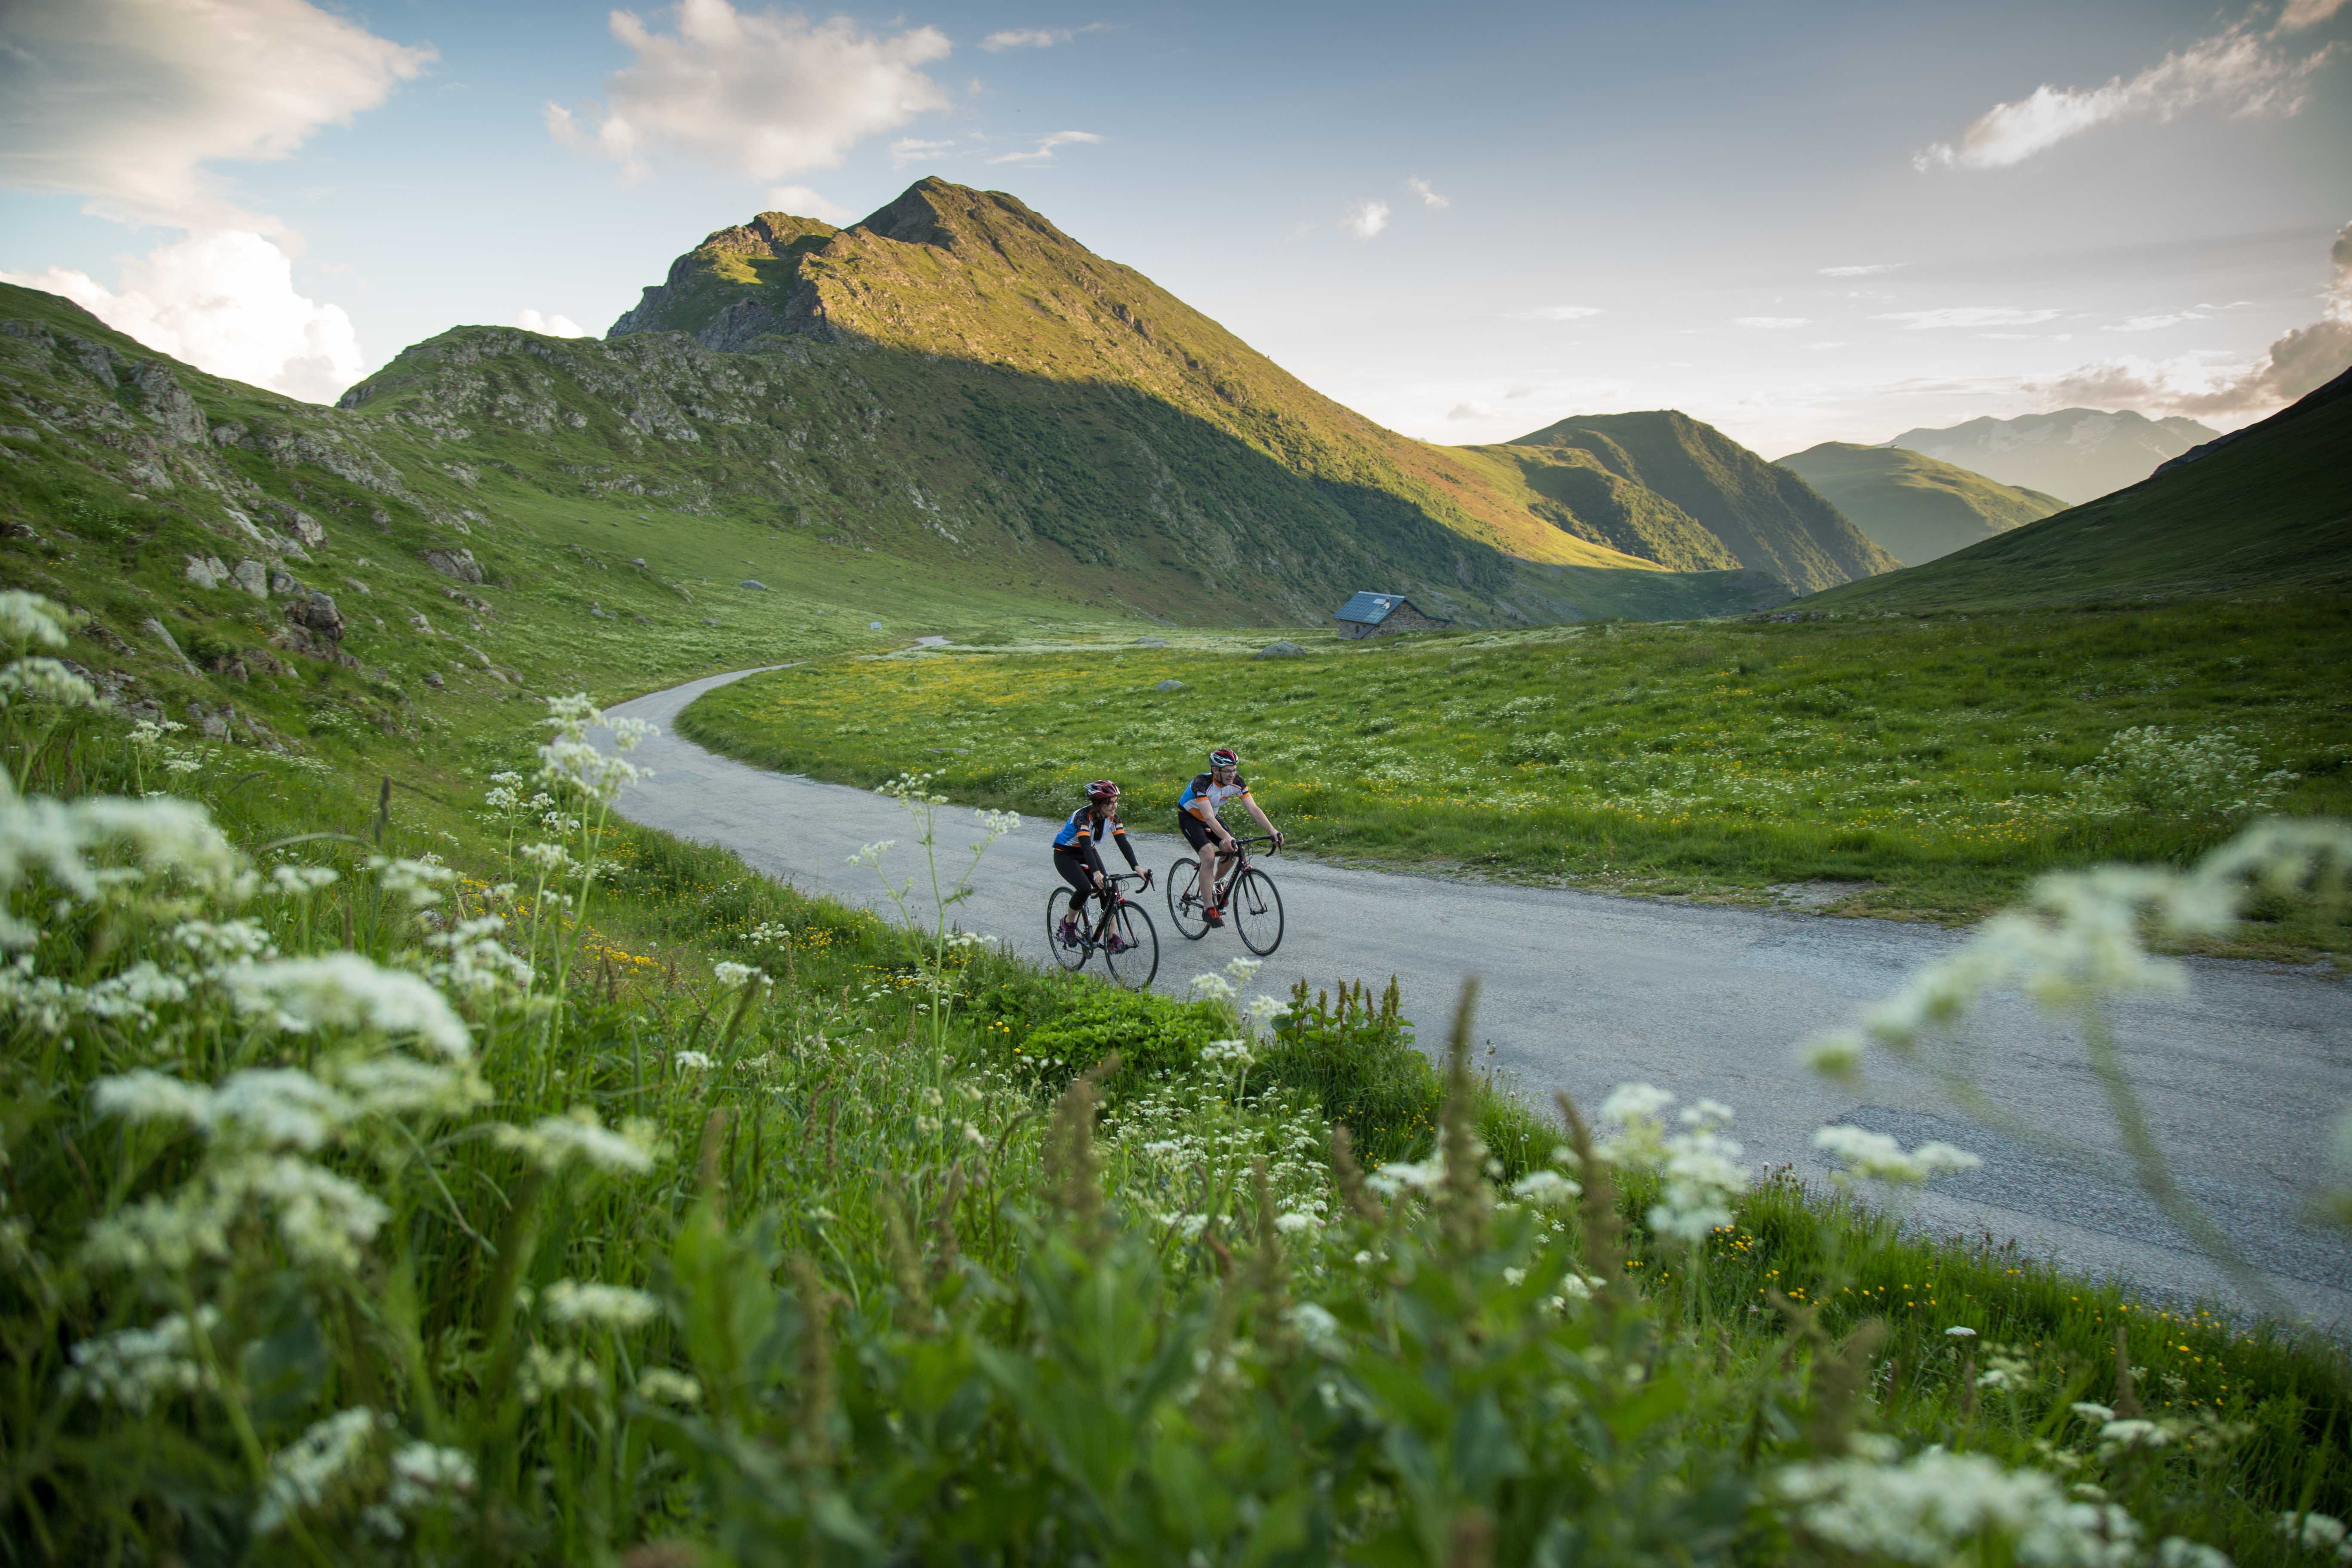 Biking in the Alps: riding up Col de Sarenne in the vicinity of Alpe d'Huez 